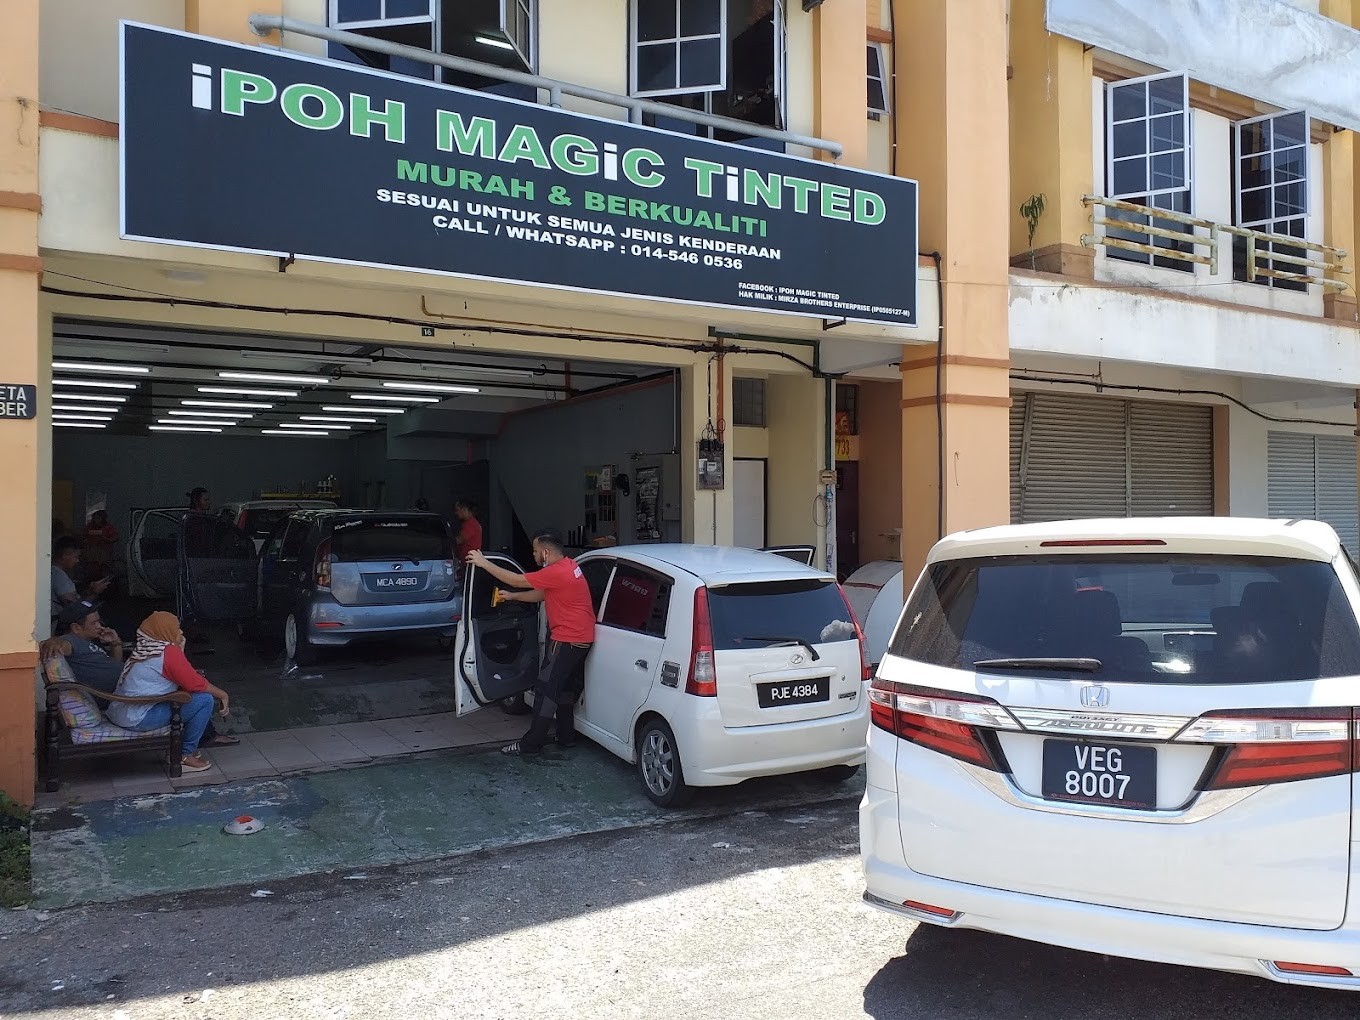 RStation Tint Specialist Ipoh [Tinted Magic Ipoh]